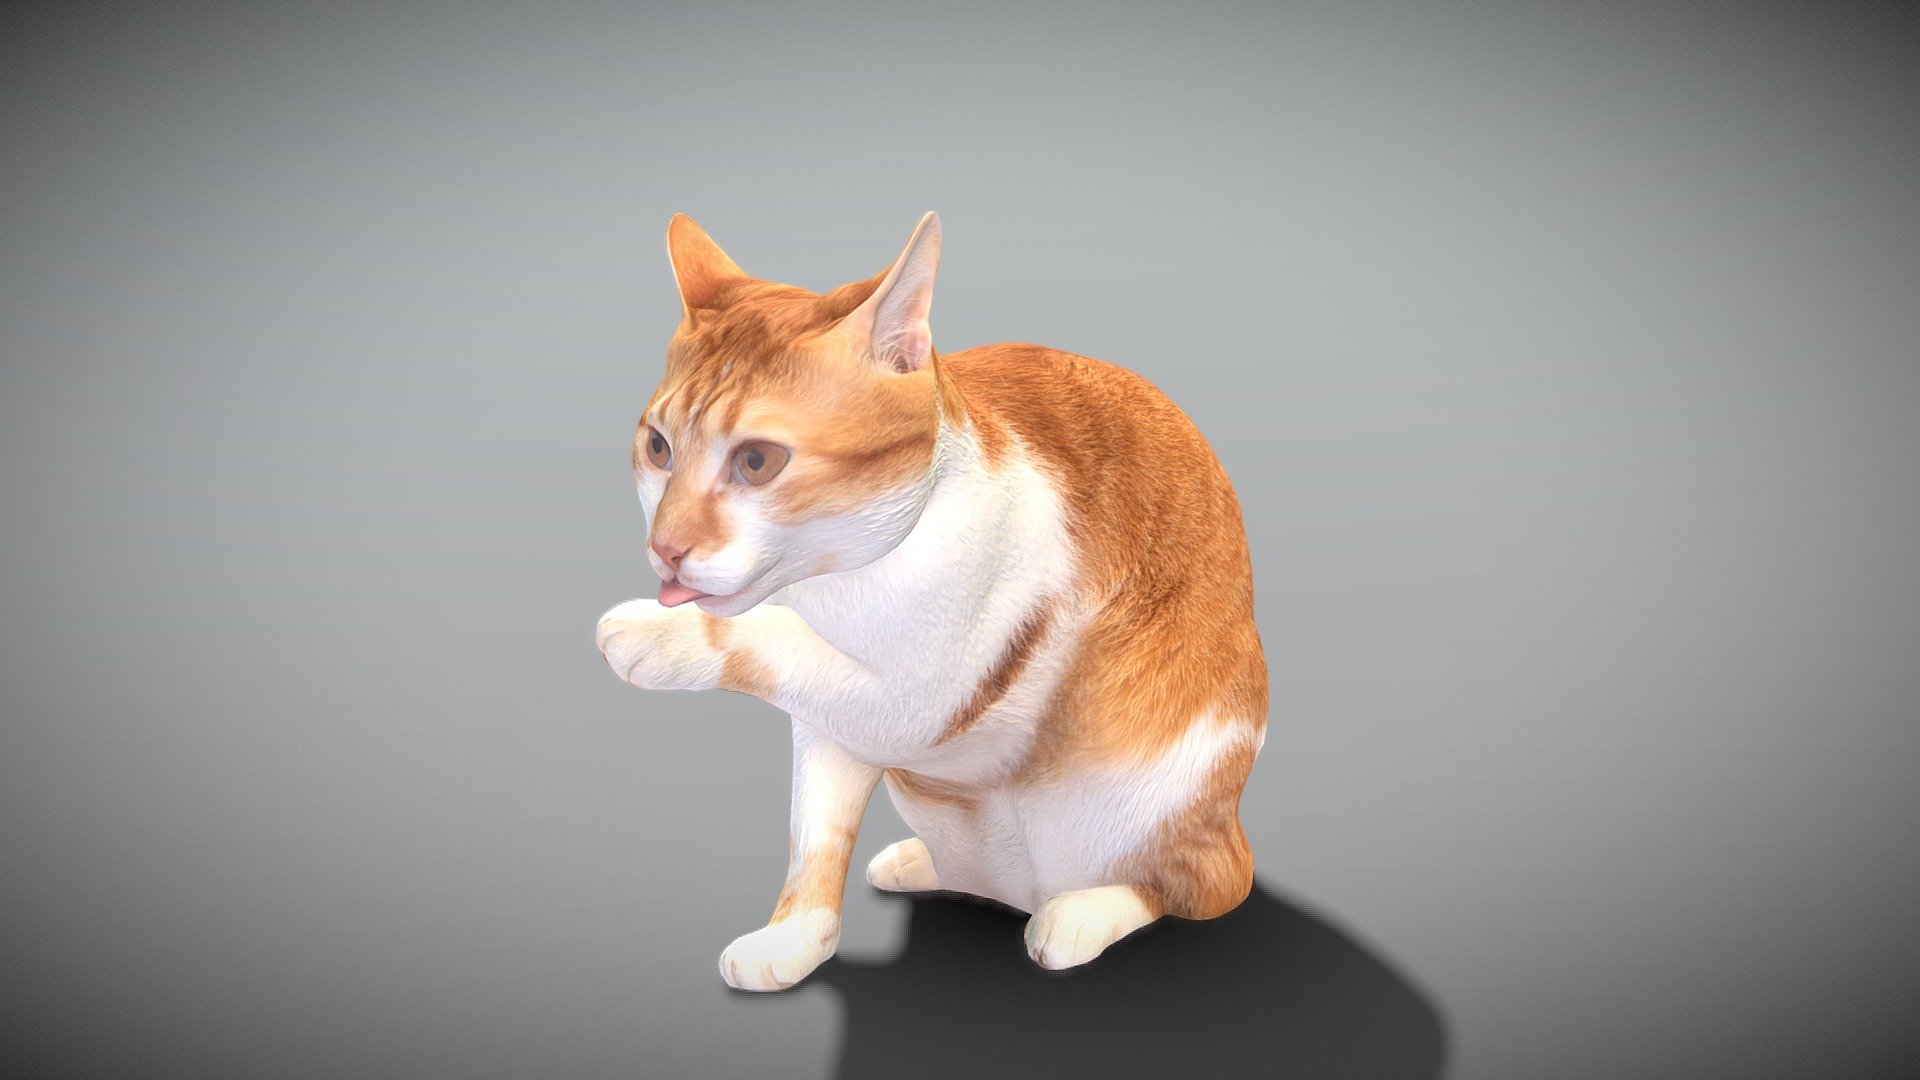 This is a true sized and highly detailed model of a young charming red cat. It will add life and coziness to any architectural visualisation of houses, playgrounds, parques, urban landscapes, etc. This model is suitable for game engine integration, VR/AR content, etc.

Technical specifications:




digital double 3d scan model

150k &amp; 30k triangles | double triangulated

high-poly model (.ztl tool with 5 subdivisions) clean and retopologized automatically via ZRemesher

sufficiently clean

PBR textures 8K resolution: Diffuse, Normal, Specular maps

non-overlapping UV map

no extra plugins are required for this model

Download package includes a Cinema 4D project file with Redshift shader, OBJ, FBX, STL files, which are applicable for 3ds Max, Maya, Unreal Engine, Unity, Blender, etc. All the textures you will find in the “Tex” folder, included into the main archive.

3D EVERYTHING

Stand with Ukraine! - Cat licking paw 45 - Buy Royalty Free 3D model by deep3dstudio 3d model